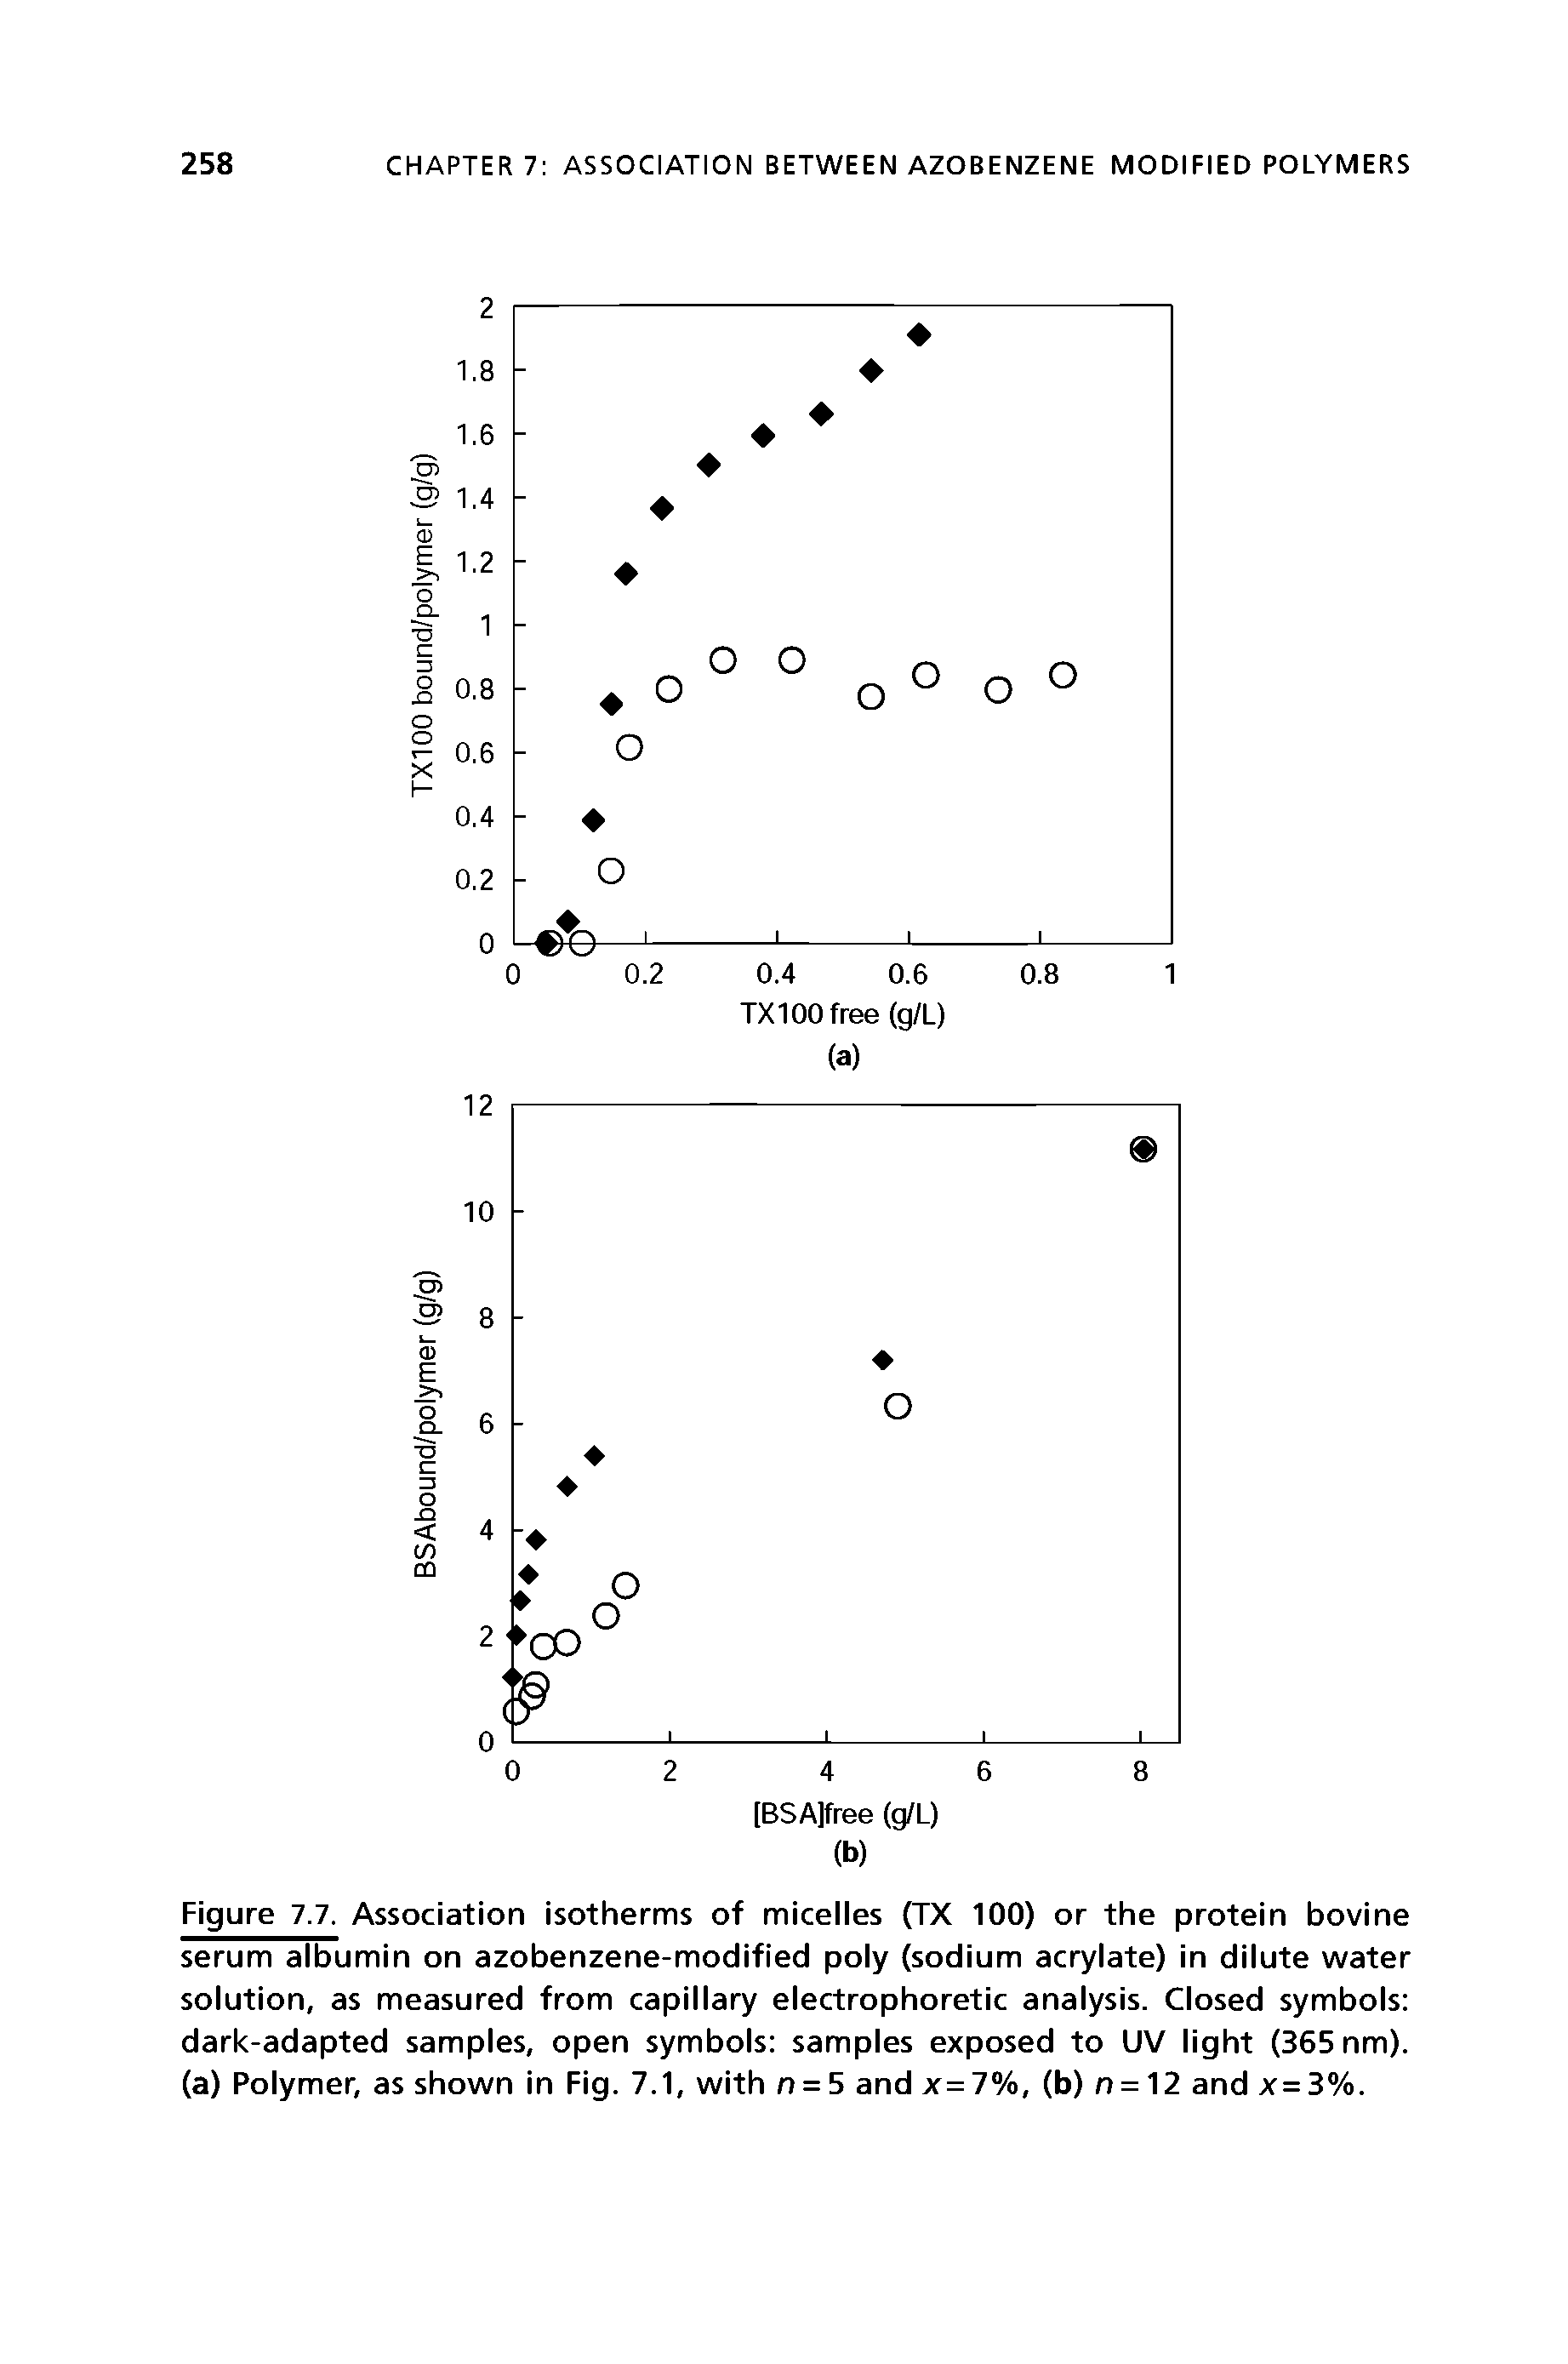 Figure 7.7. Association isotherms of micelles (TX 100) or the protein bovine serum albumin on azobenzene-modified poly (sodium acrylate) in dilute water solution, as measured from capillary electrophoretic analysis. Closed symbols dark-adapted samples, open symbols samples exposed to UV light (365 nm). (a) Polymer, as shown in Fig. 7.1, with n = 5 and x=7%, (b) n = 12 and x=3%.